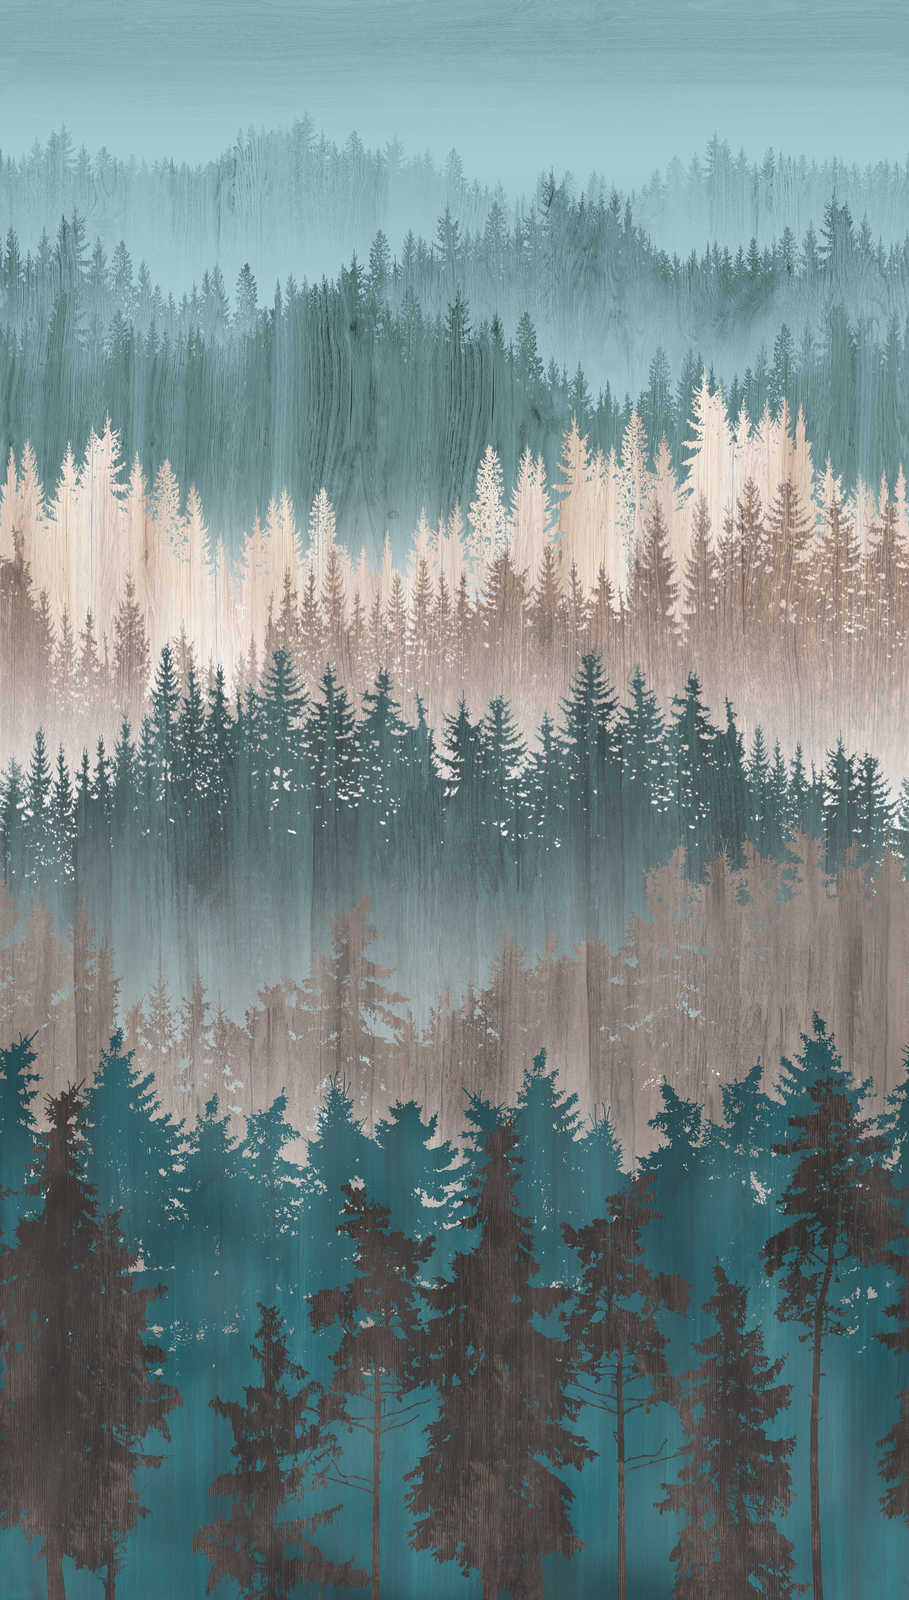             Non-woven wallpaper with abstract forest pattern - blue, brown, beige
        